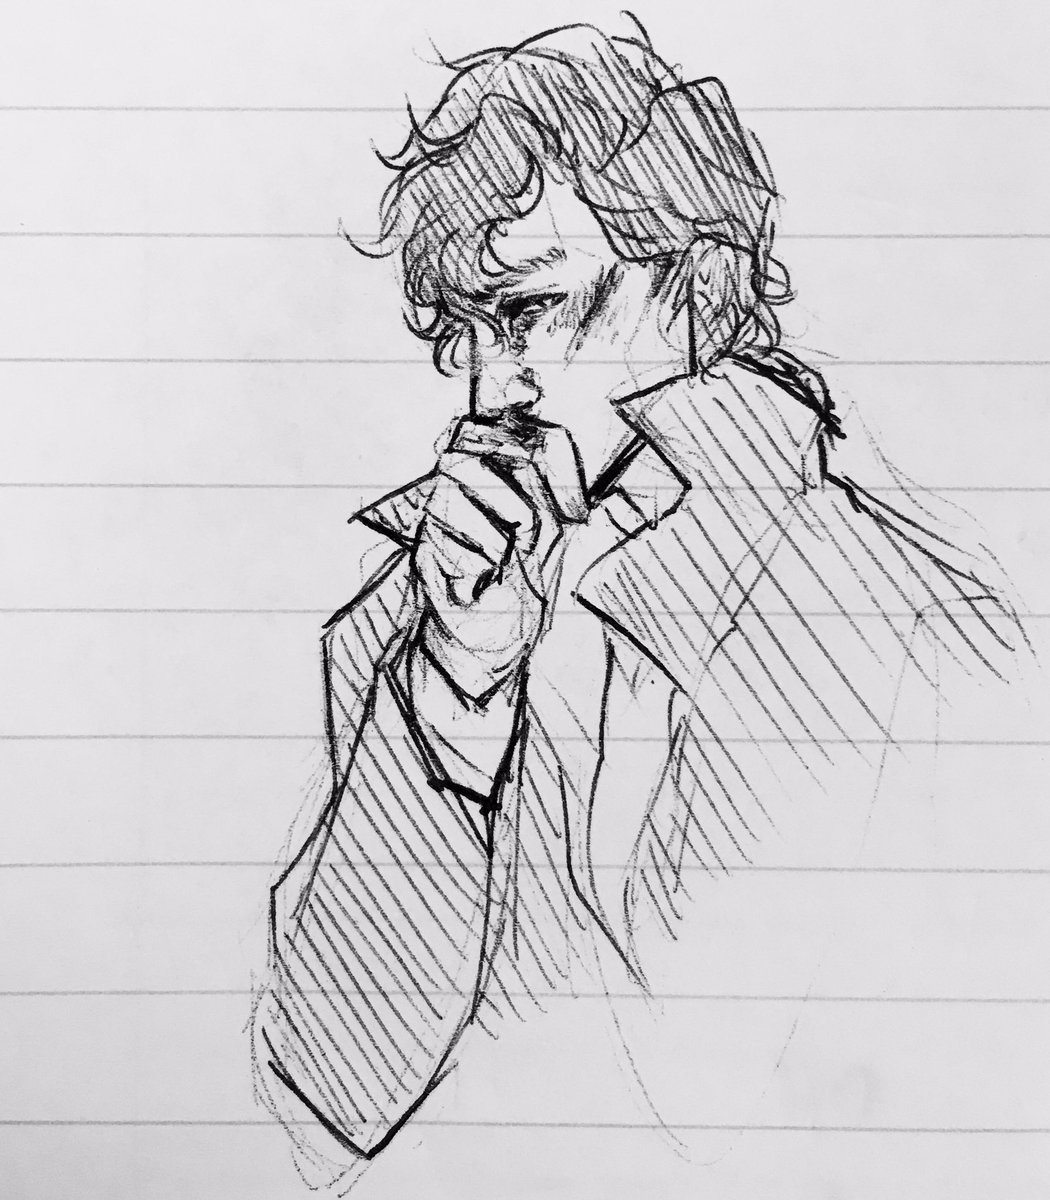 more beat up sherlock cause i can 